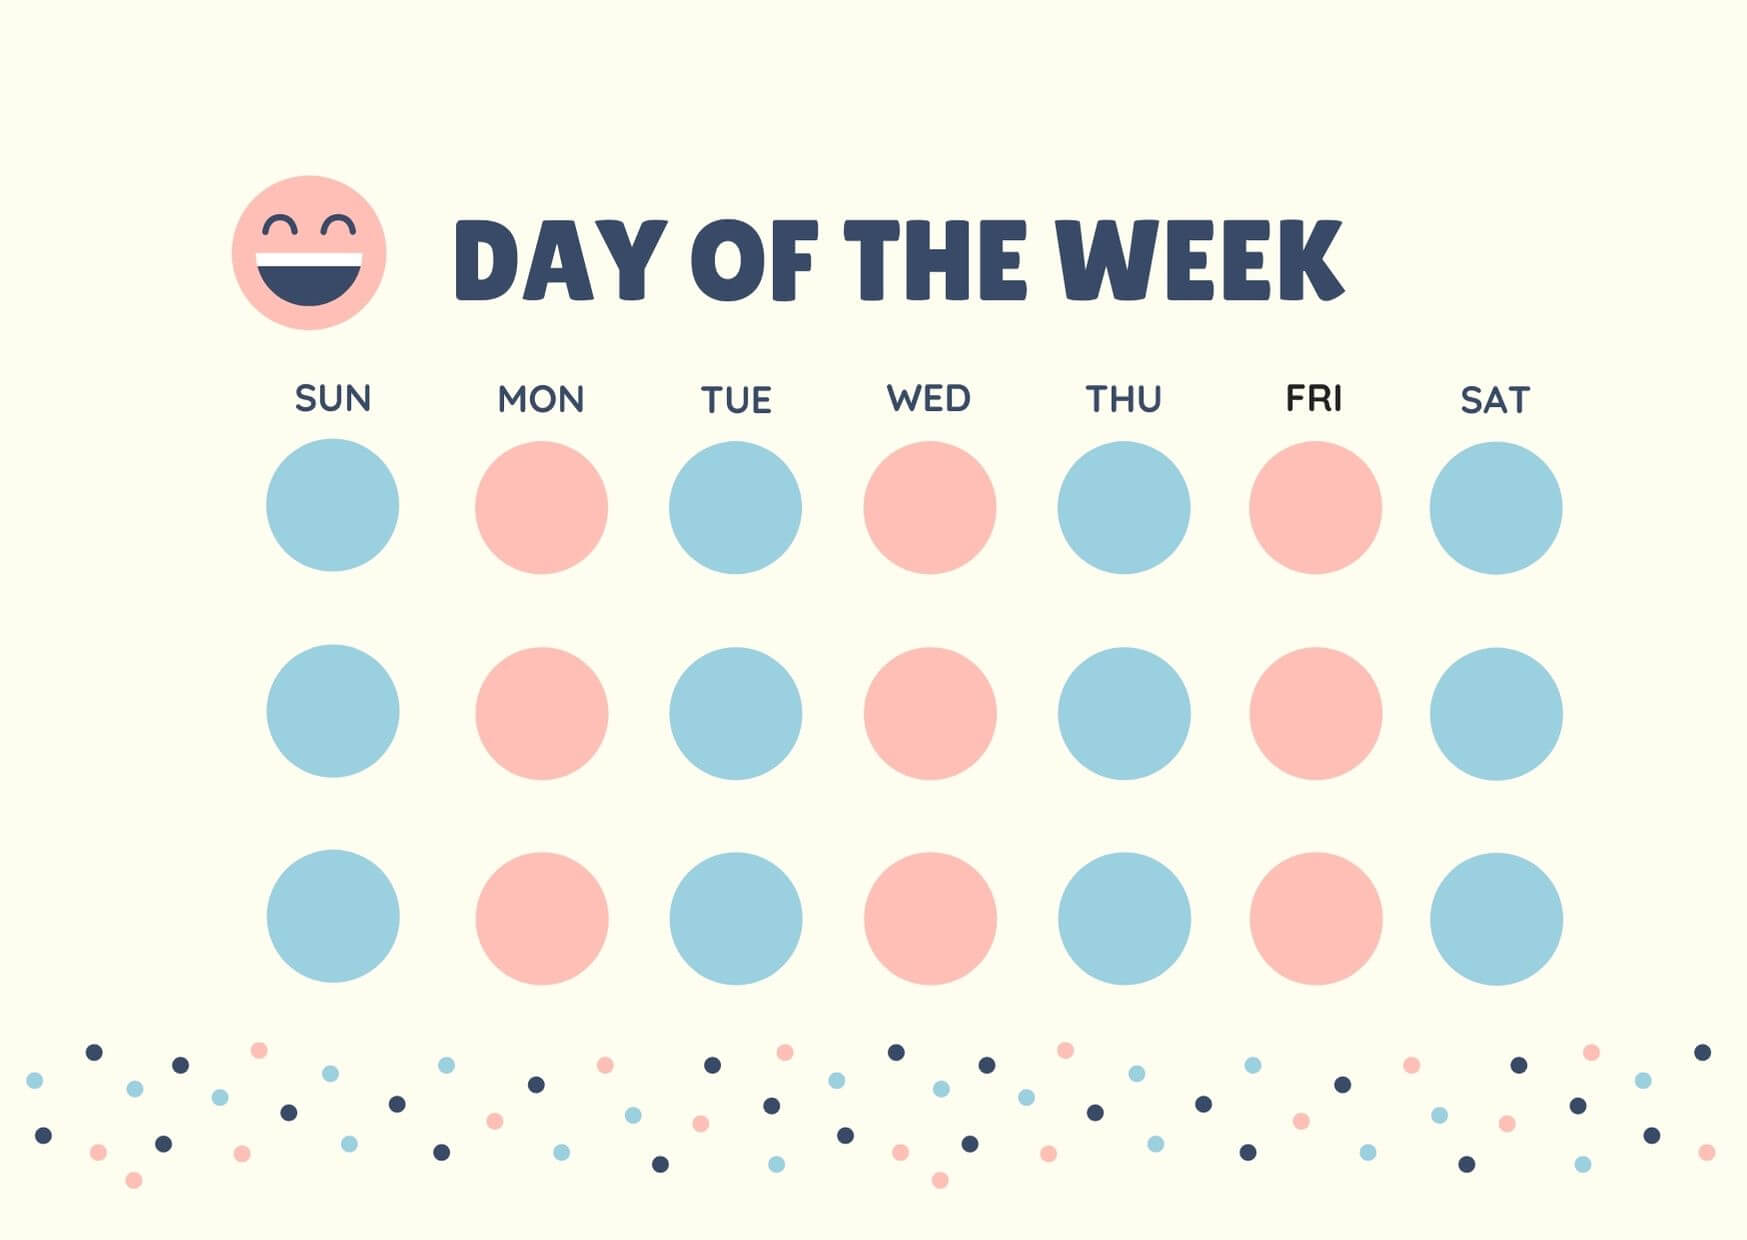 Day of the Week in Japanese